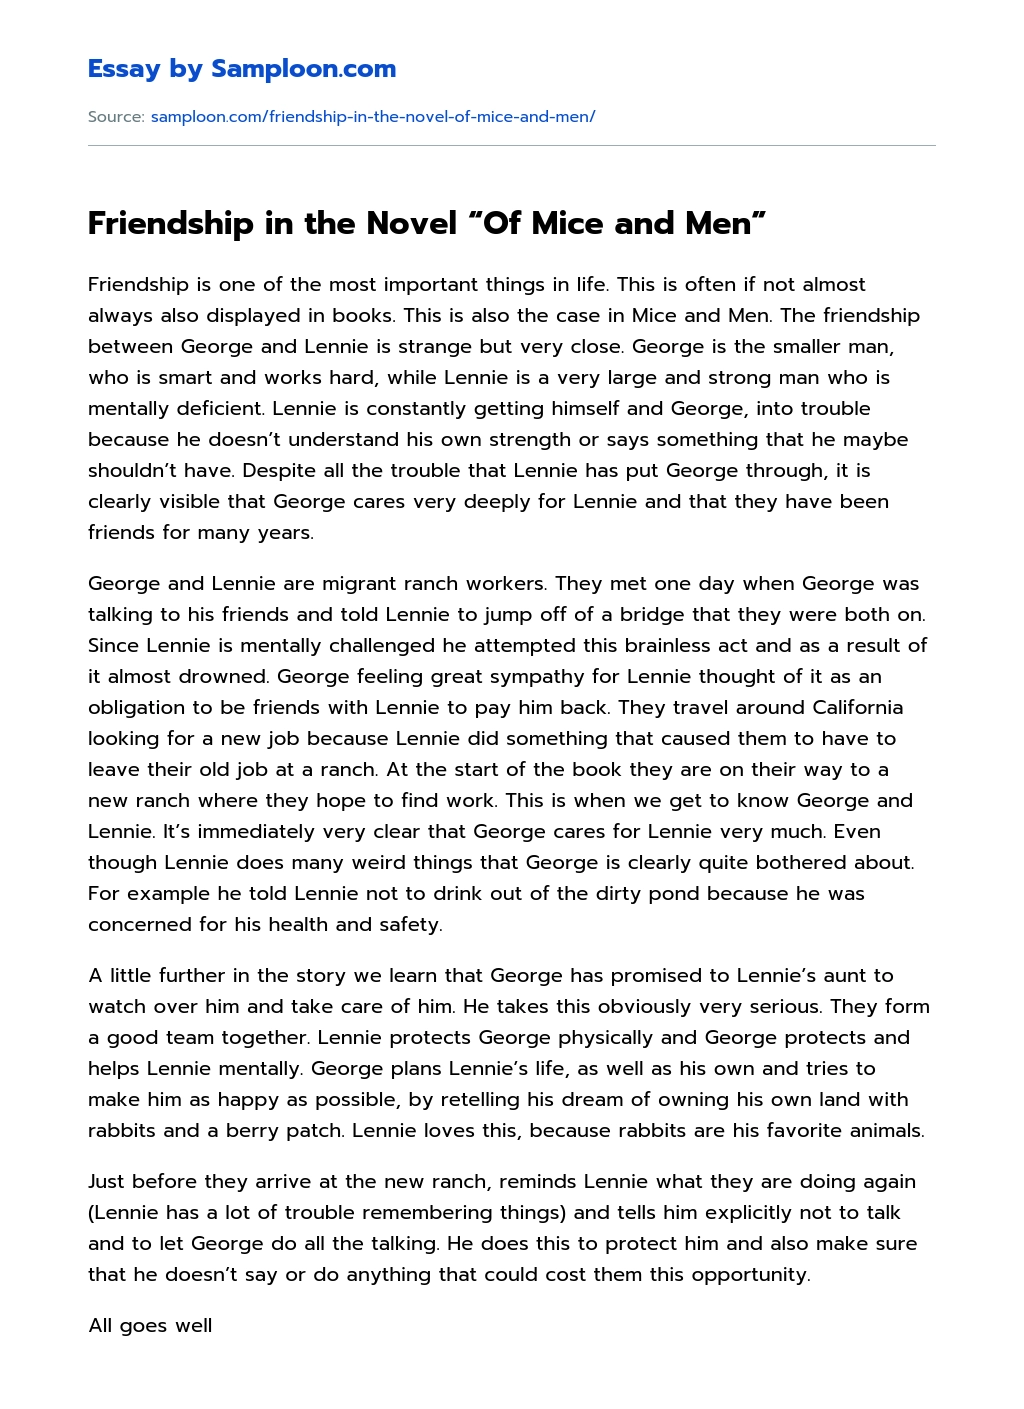 Friendship in the Novel “Of Mice and Men” essay